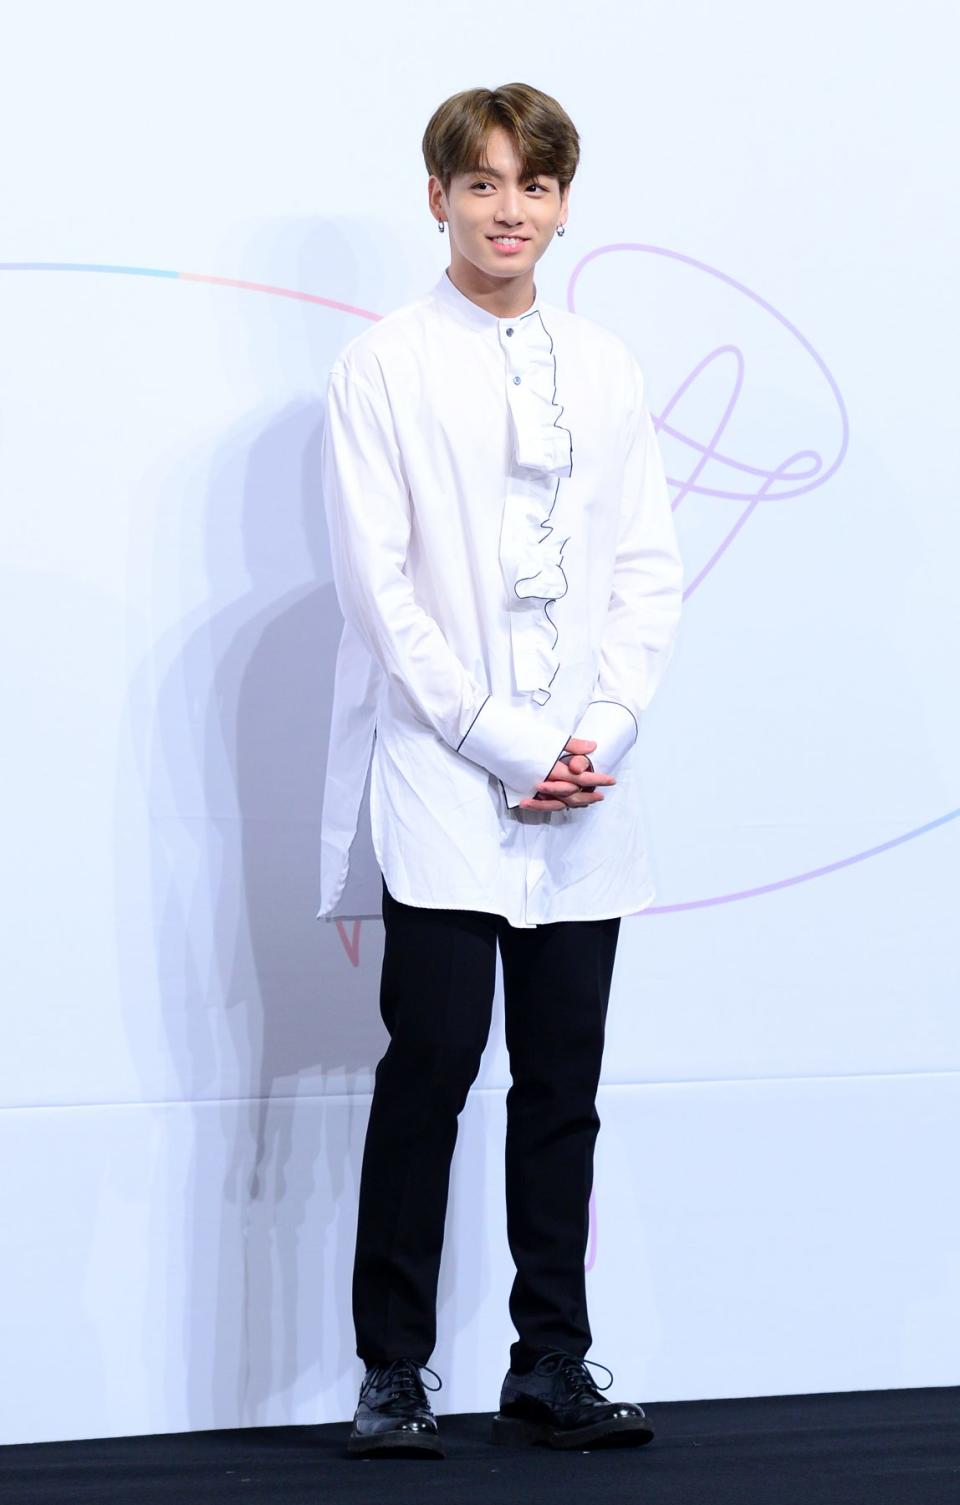 SEOUL, SOUTH KOREA - SEPTEMBER 18: Jungkook of BTS attends the press conference for BTS's New Album 'LOVE YOURSELF: Her' release at Lotte Hotel Seoul on September 18, 2017 in Seoul, South Korea. (Photo by THE FACT/Imazins via Getty Images)